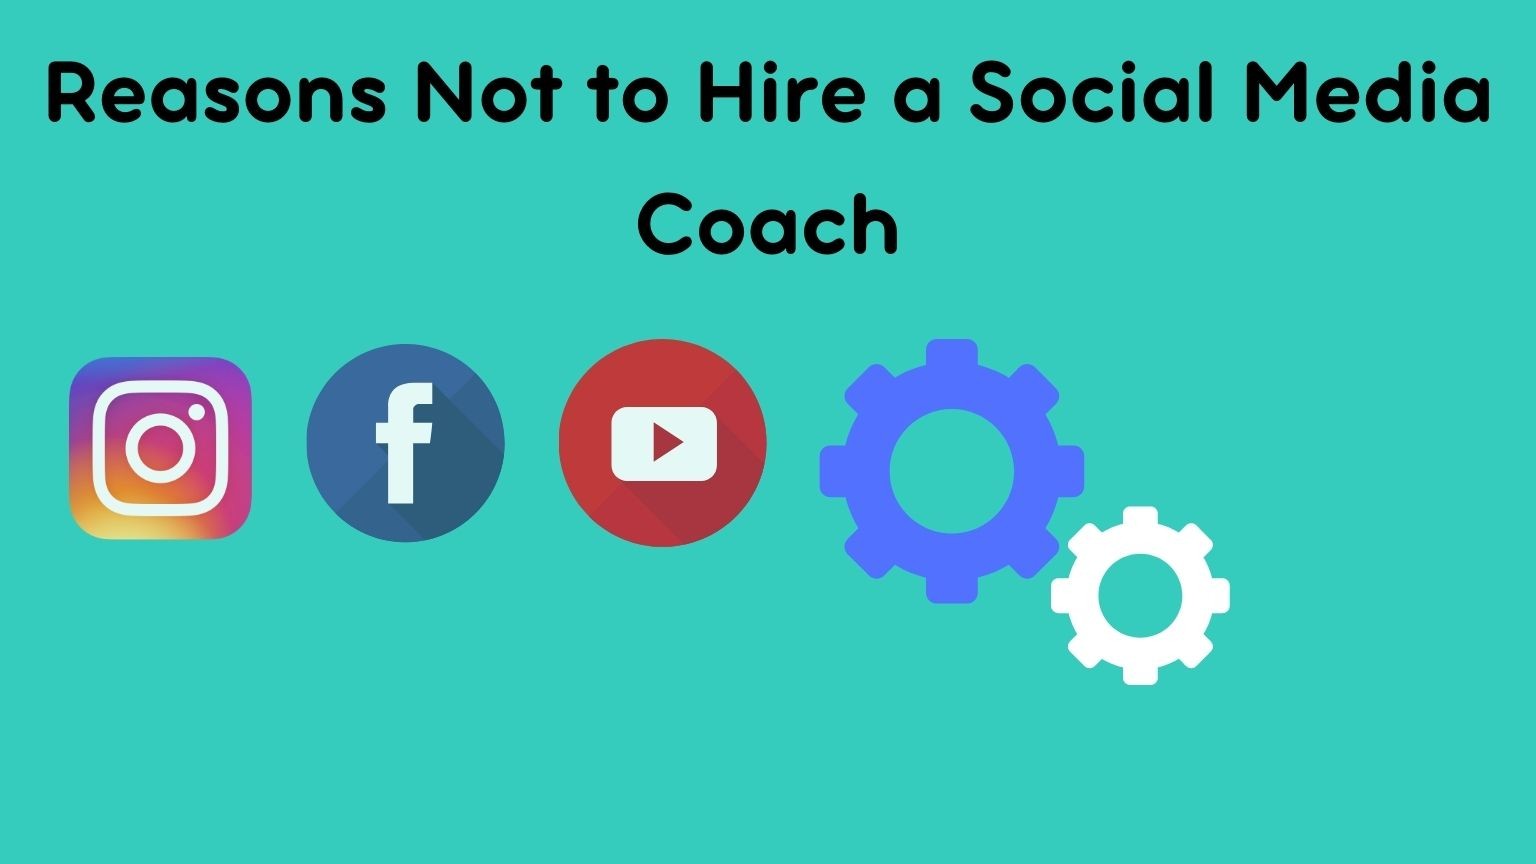 Reasons Not to Hire a Social Media Coach